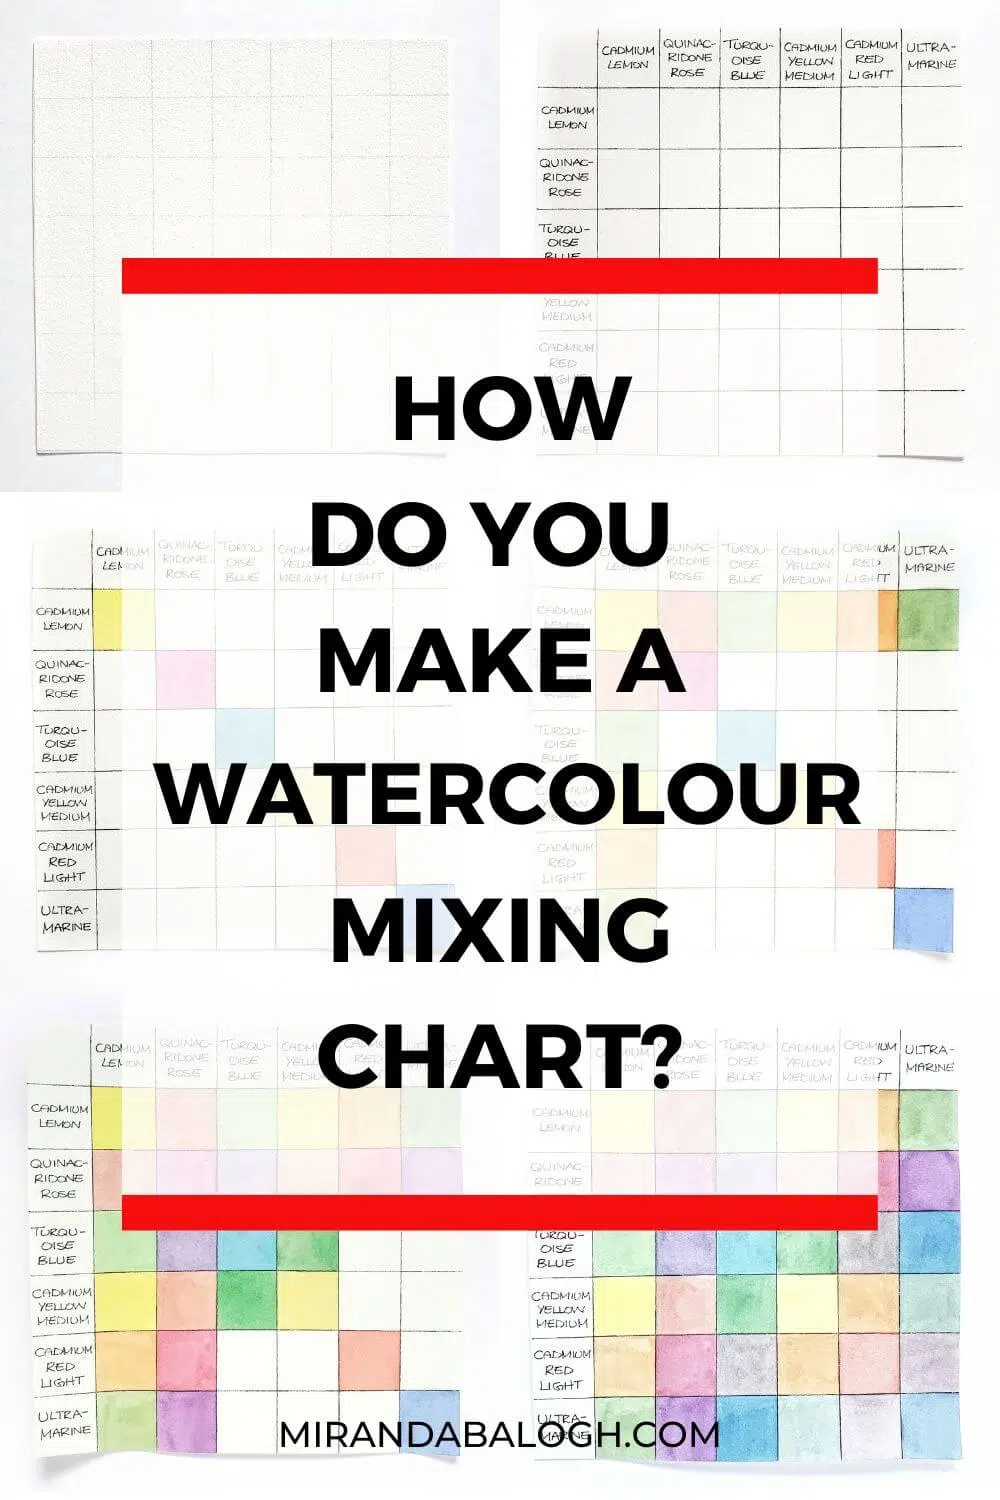 Have you ever wondered how do you make a watercolour mixing chart? If so, then you should check out this easy watercolour mixing chart tutorial to learn how to make your own. By creating a visual reference of your watercolour paints, you’re able to see all the watercolour mixing combinations laid out nicely on your chart. In addition, you can use it as a reference when you paint.